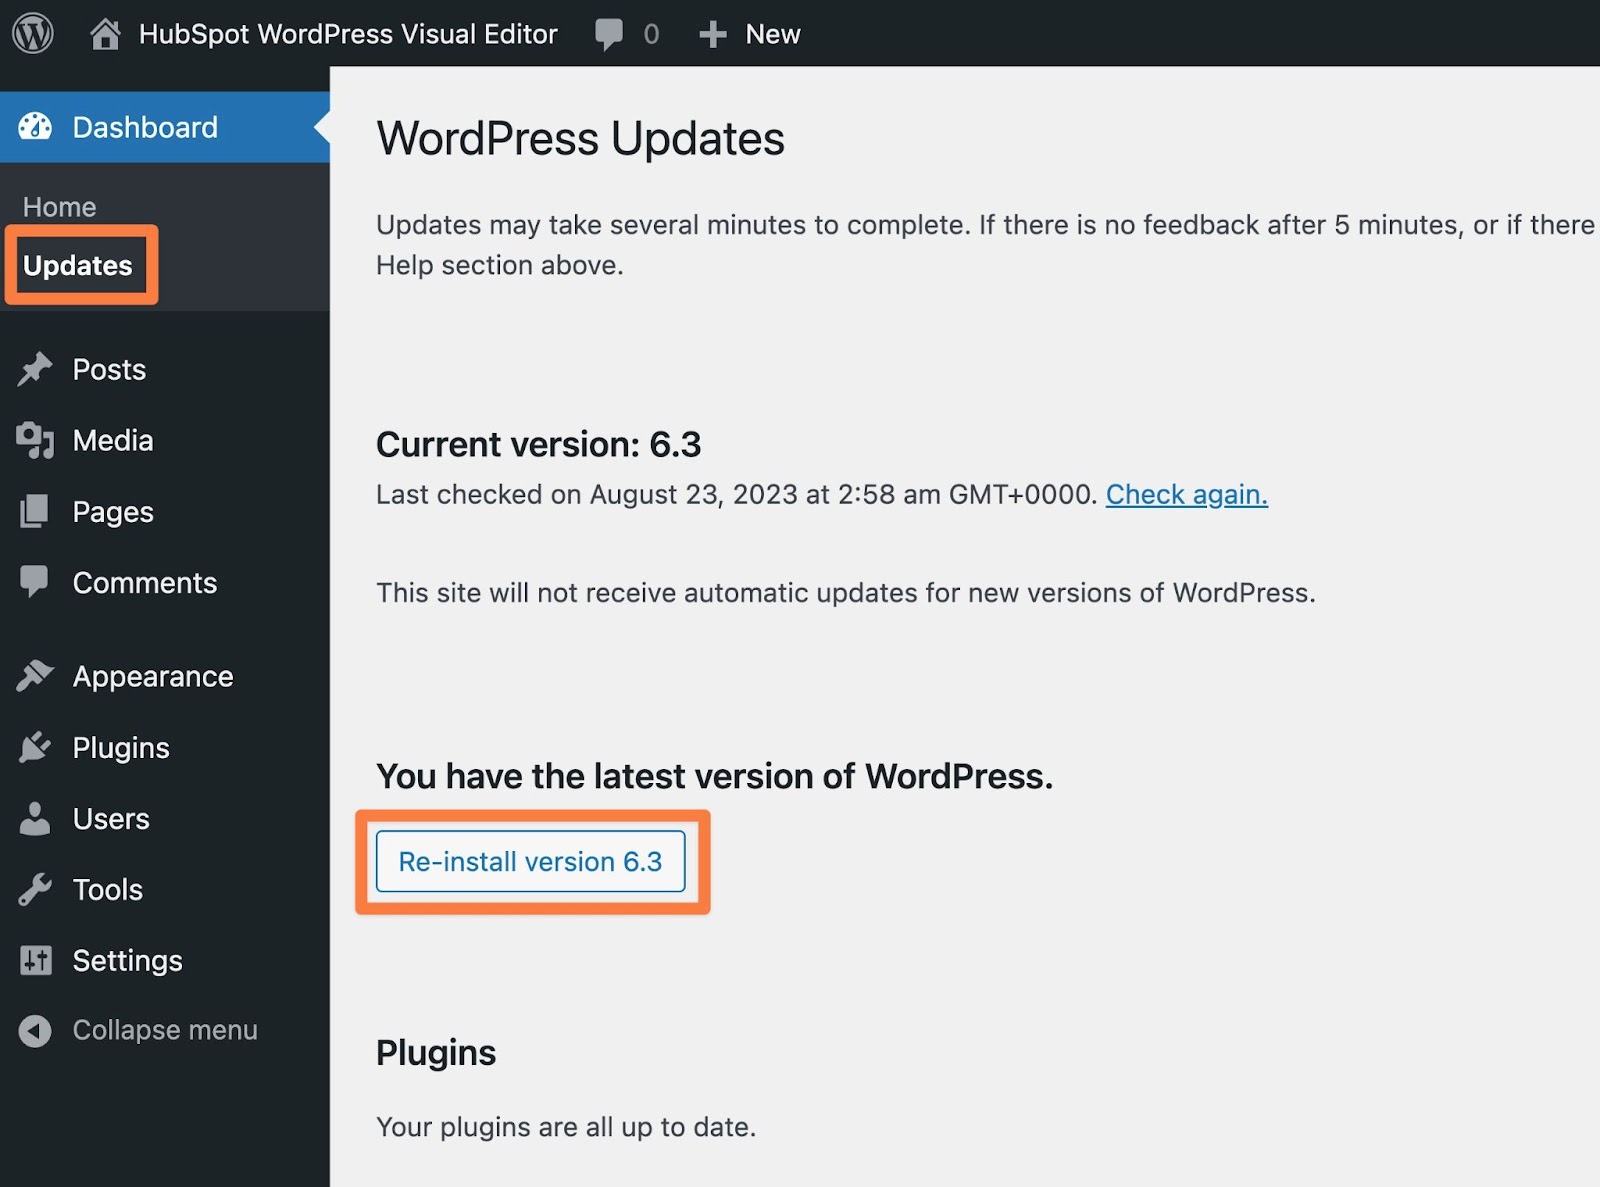 How to re-install the WordPress software